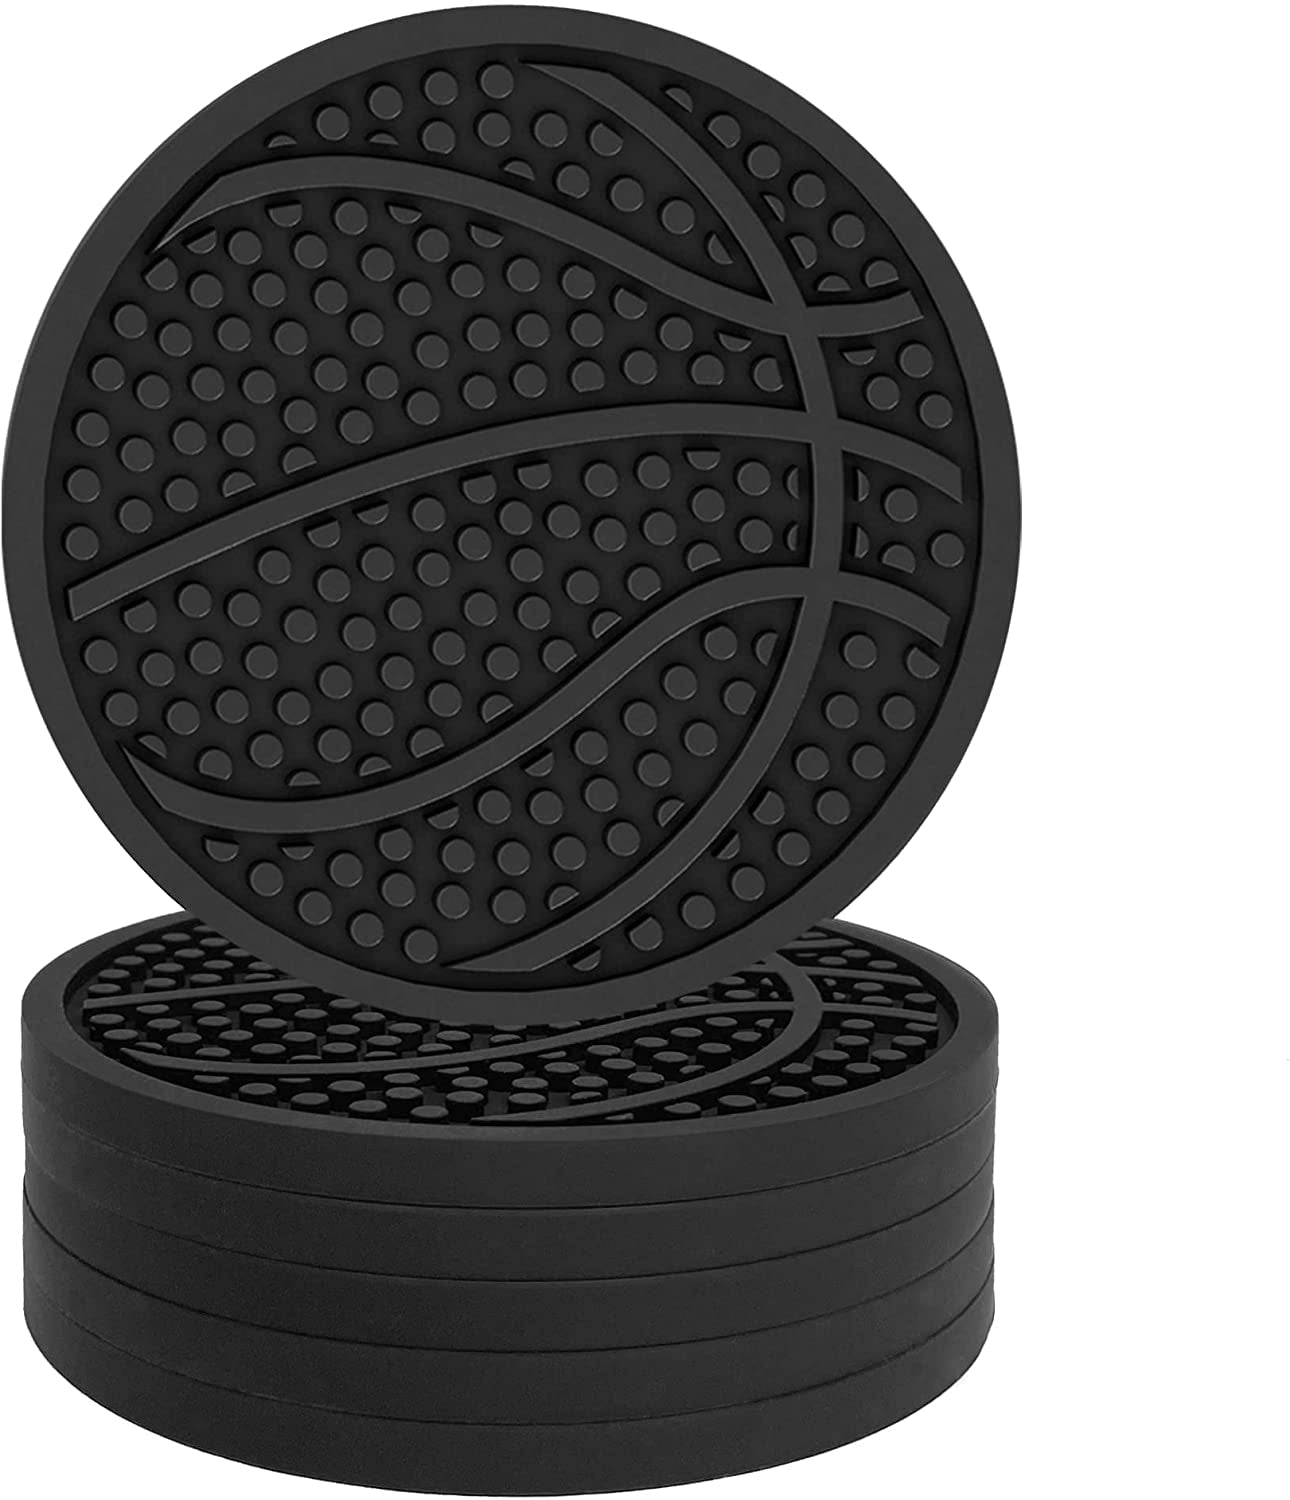 Silicone Sports Coasters by  - Set of 6 - Protection for Any Table Type - Fits Any Size of Drinking Glasses - Slip Resistant - Easy to Clean - Basketball